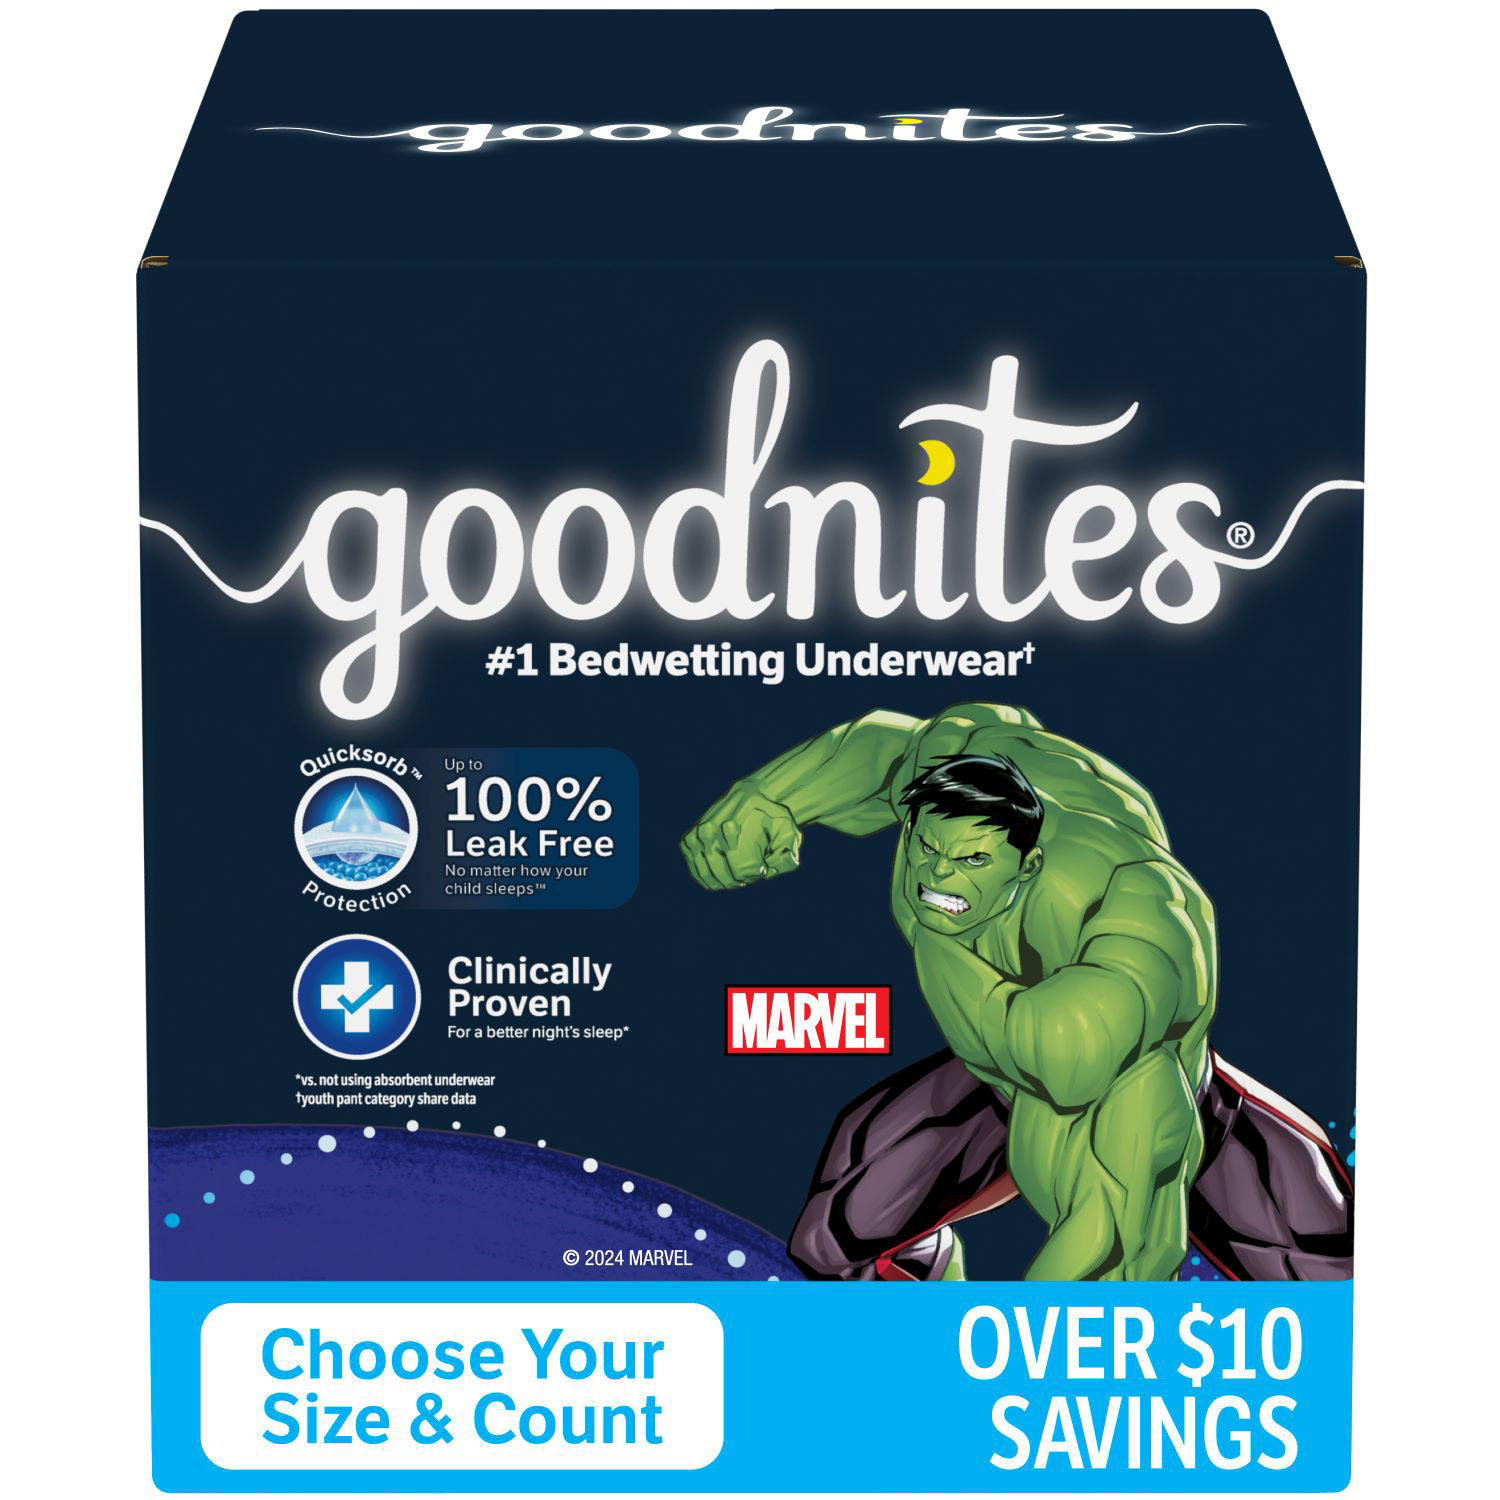 UPC 036000450835 product image for Goodnites Nighttime Bedwetting Underwear for Boys S/M -74 ct. (43 - 68 lbs.) | upcitemdb.com